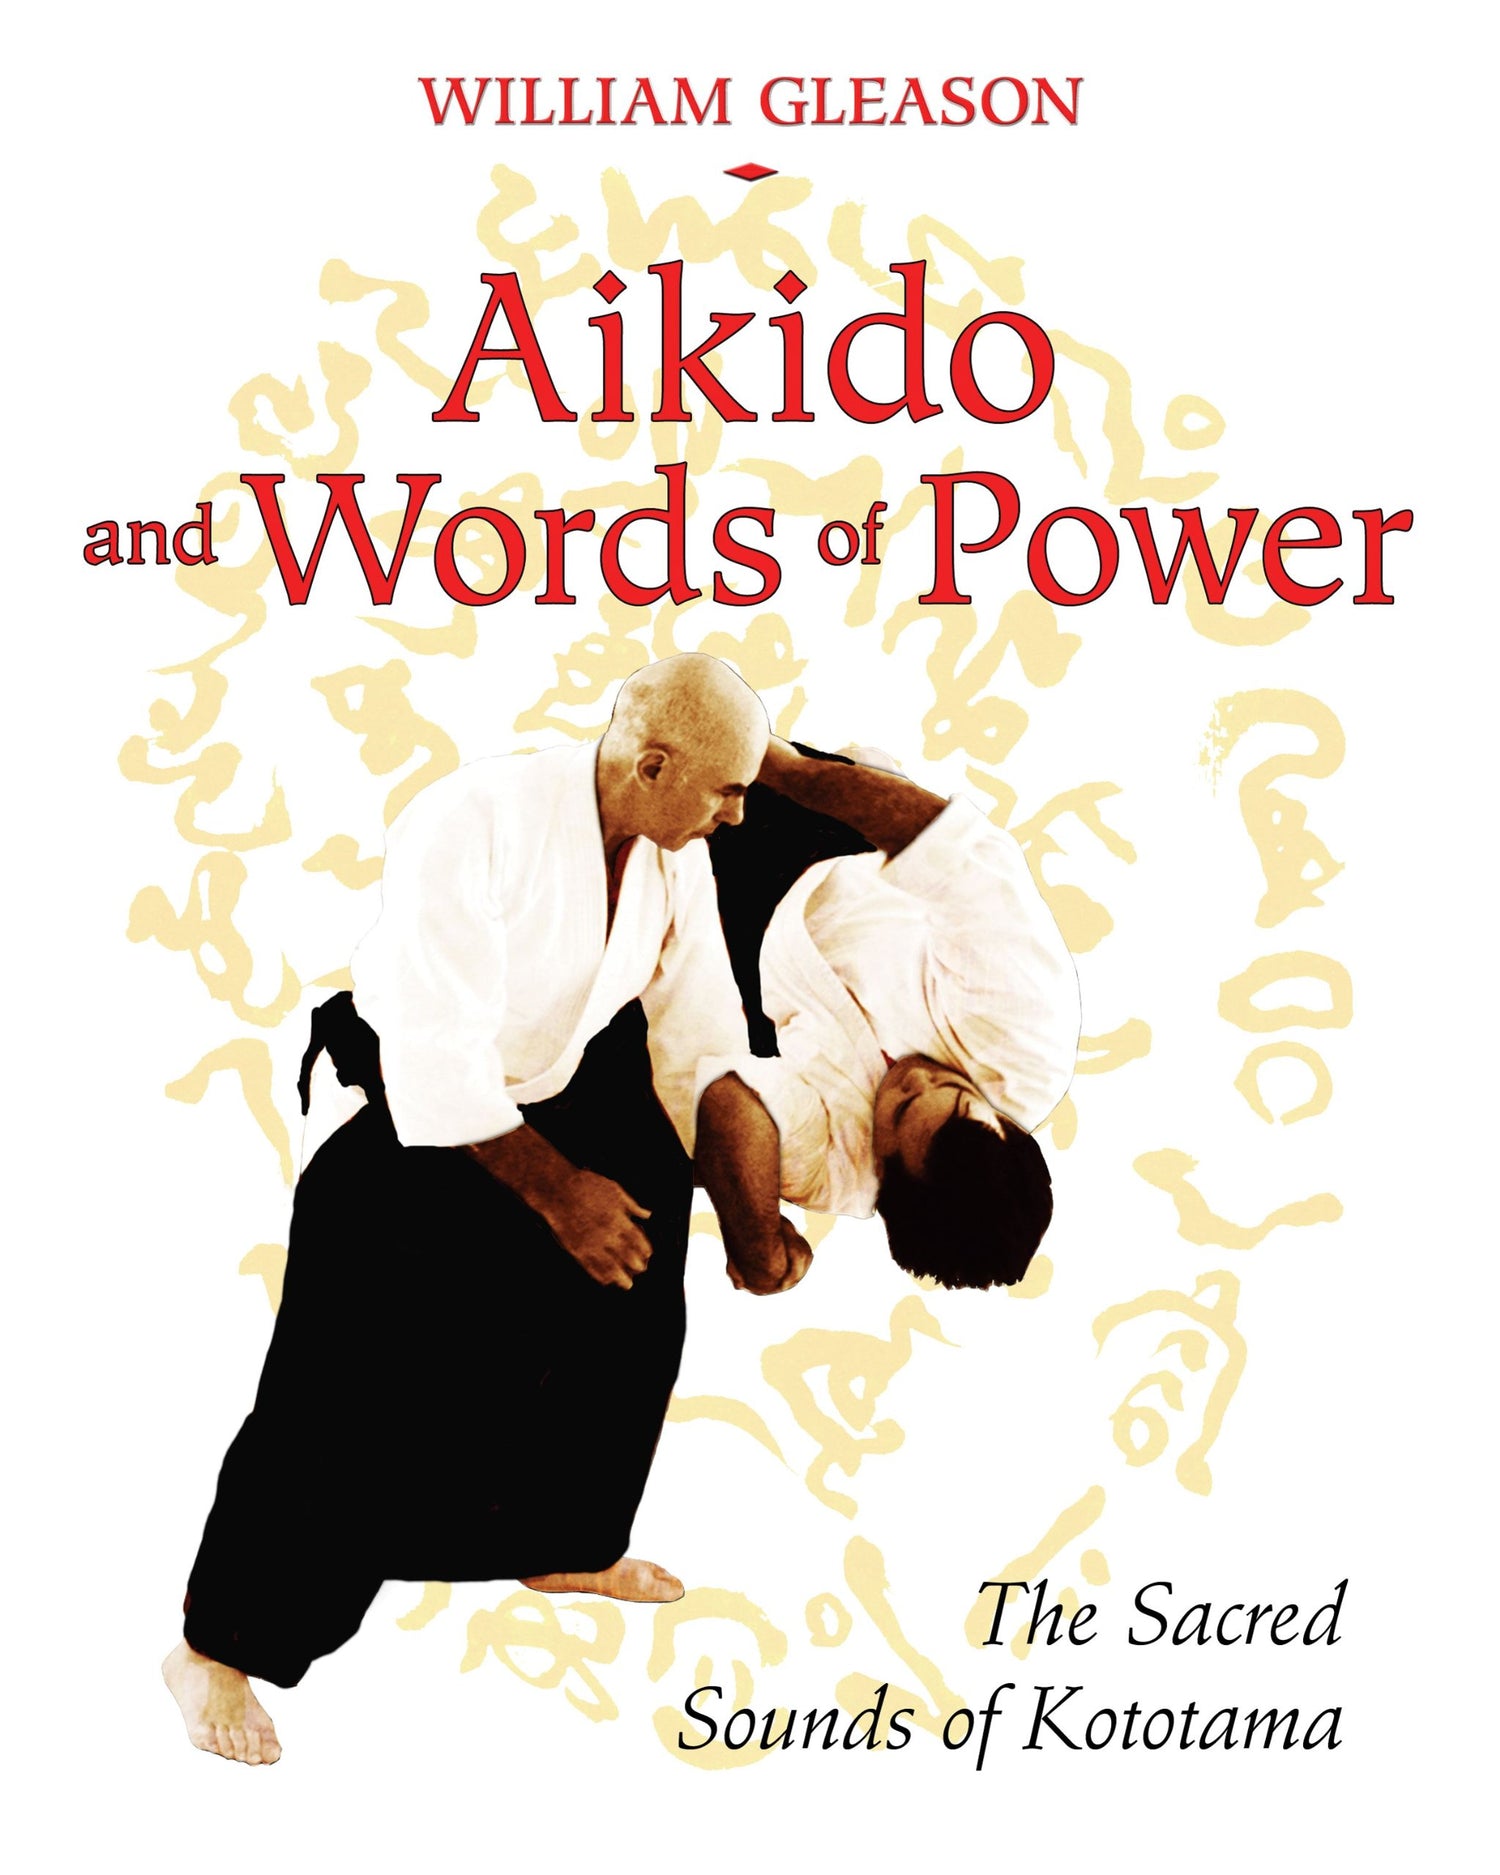 Aikido and Words of Power: The Sacred Sounds of Kototama Book by William Gleason - Budovideos Inc